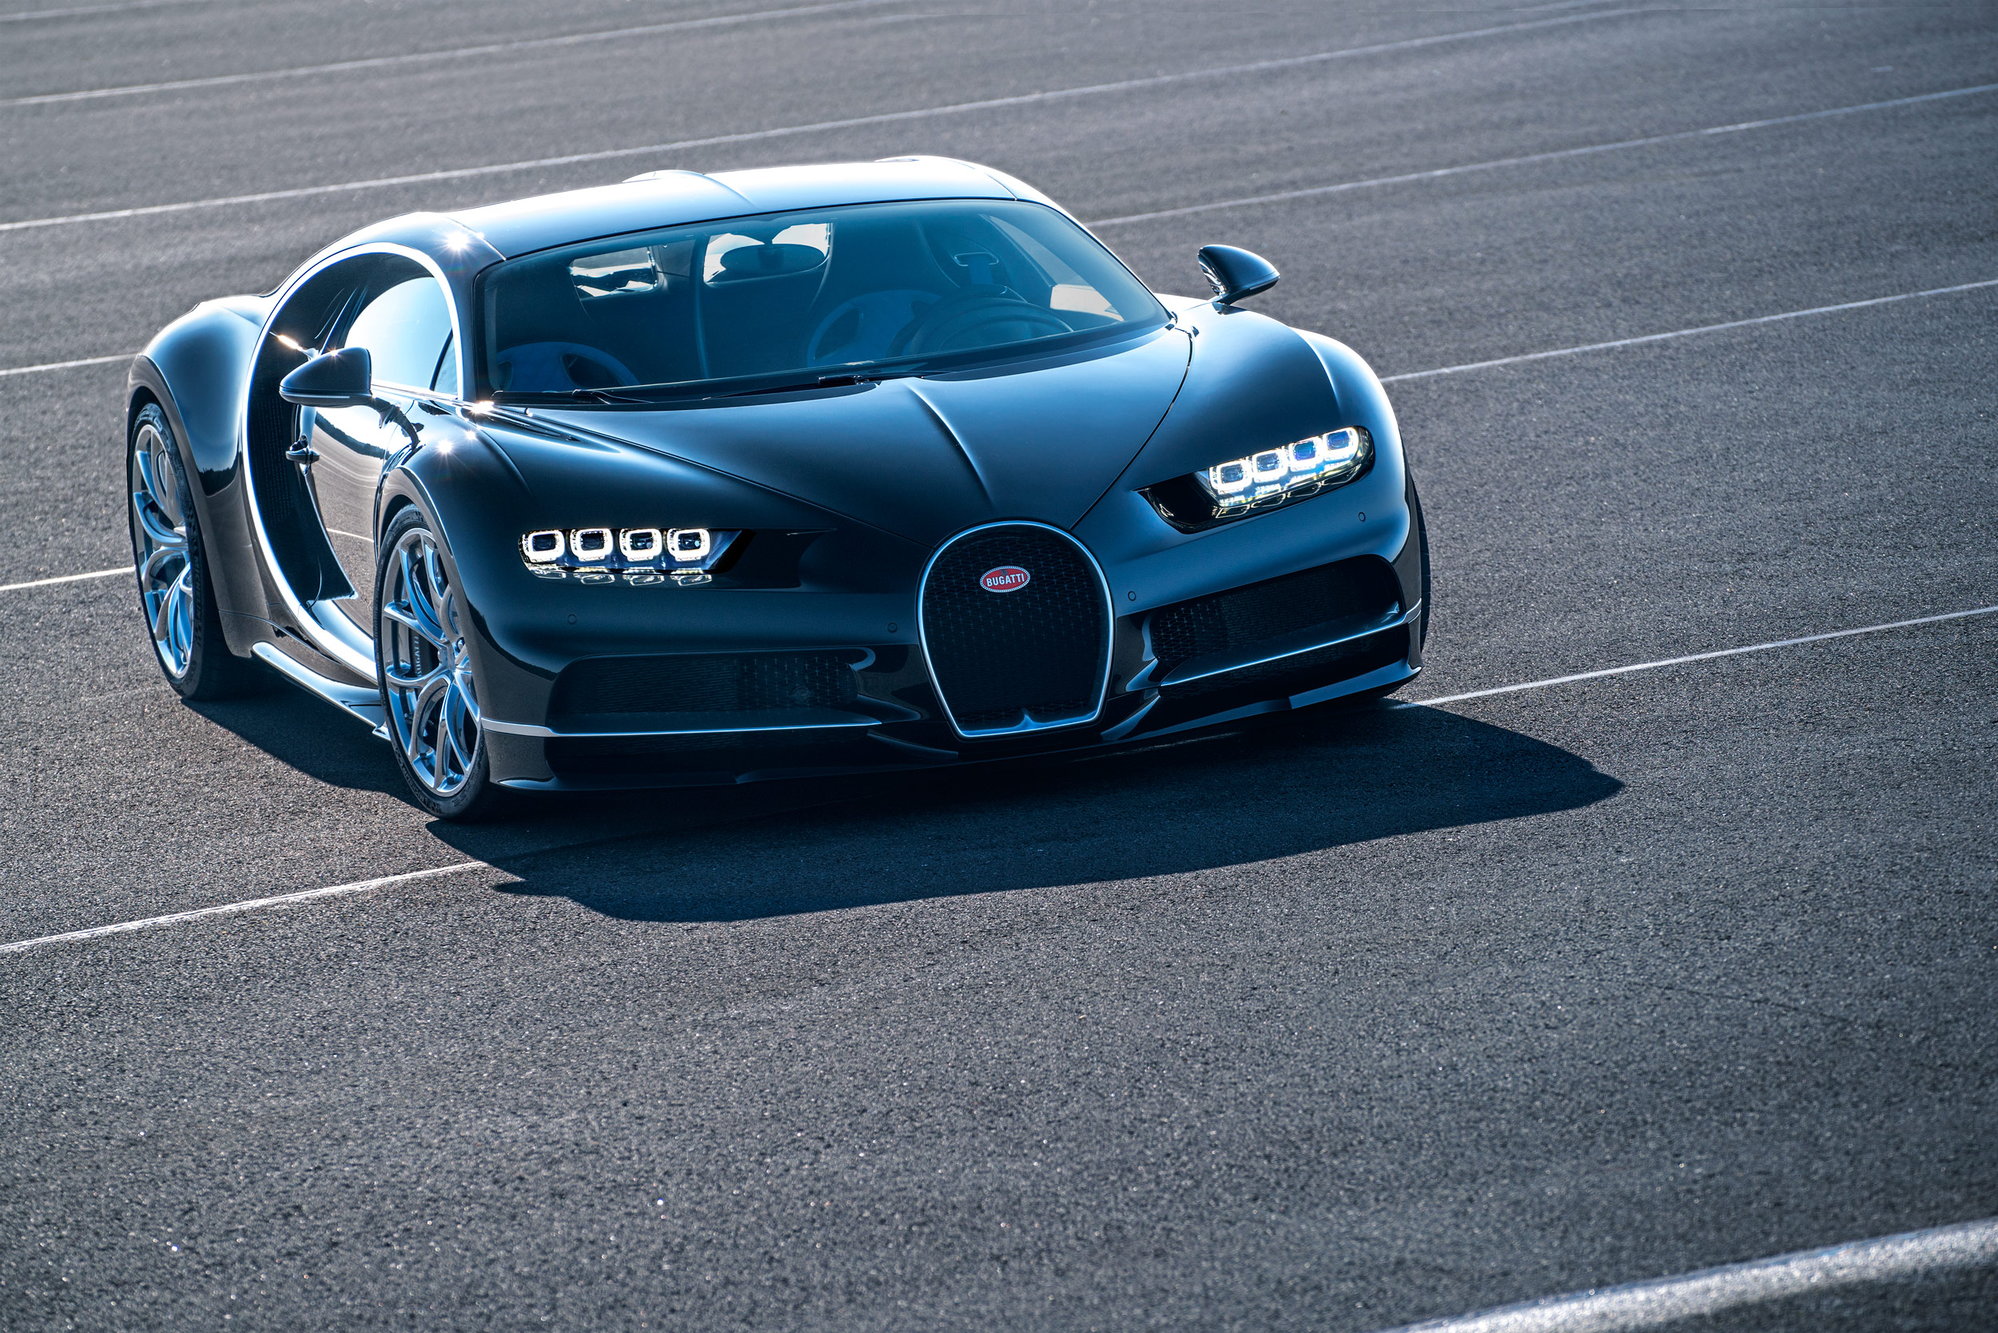 Bugatti drives into luxury home hi-fi space with Royale speakers